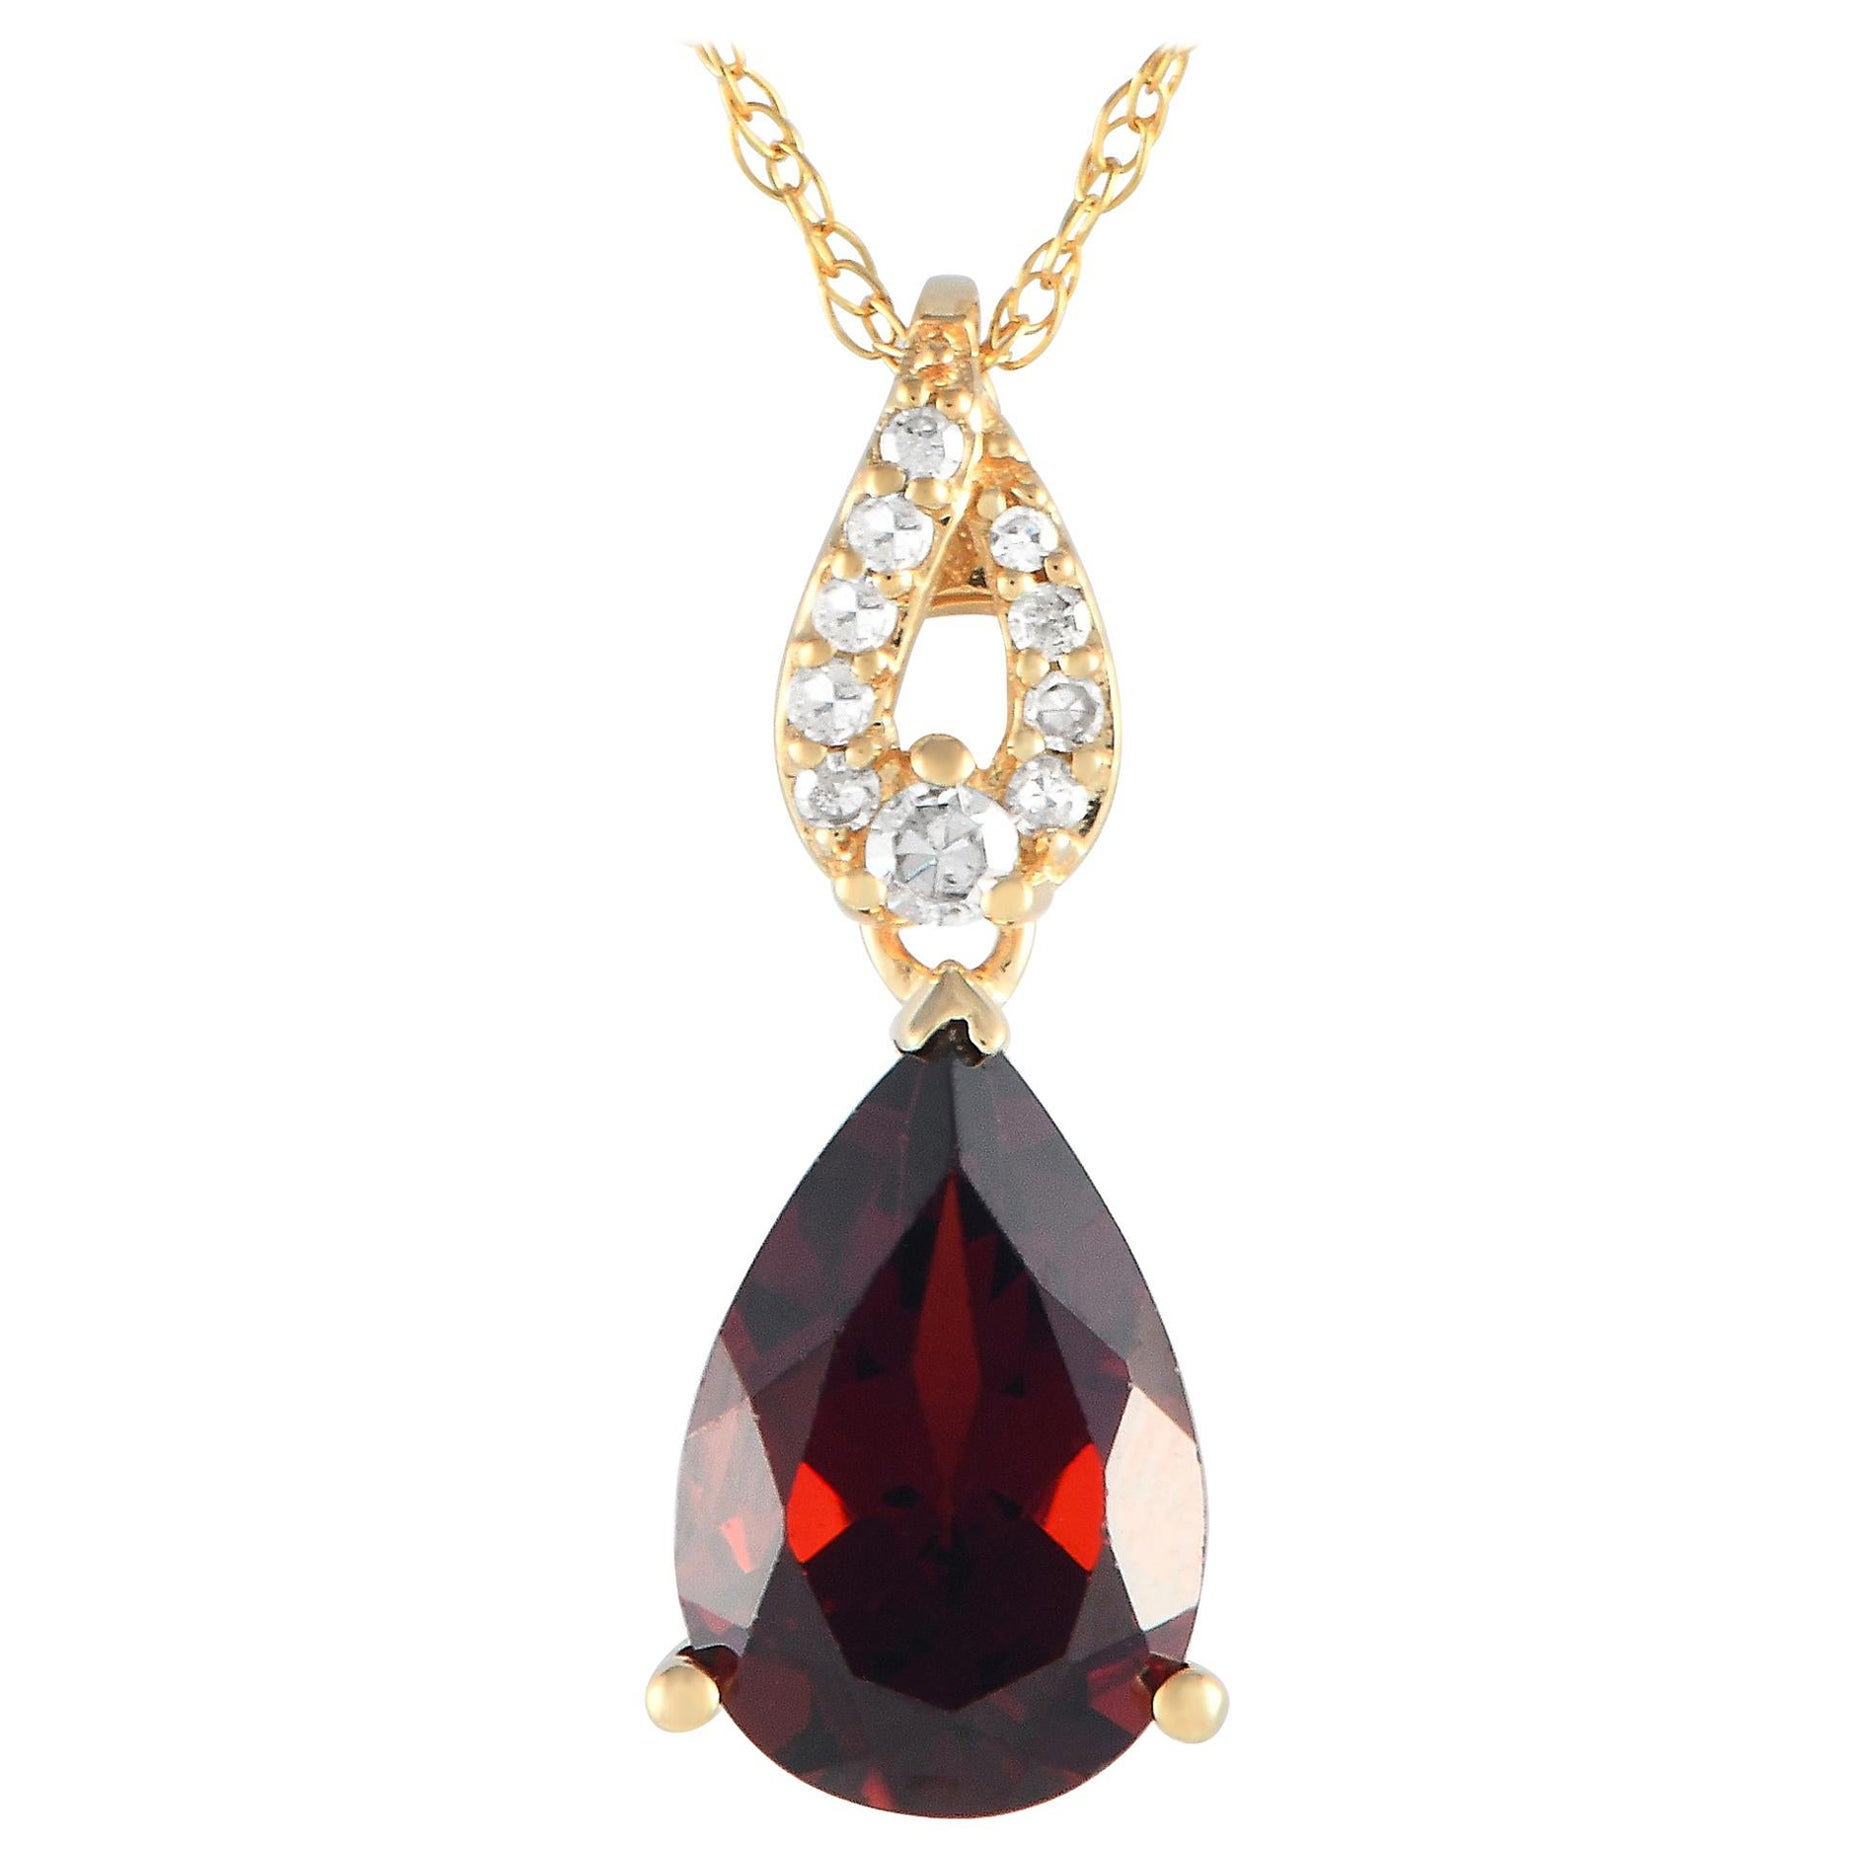 LB Exclusive 14K Yellow Gold 0.06ct Diamond and Garnet Necklace PD4-16184YGA For Sale